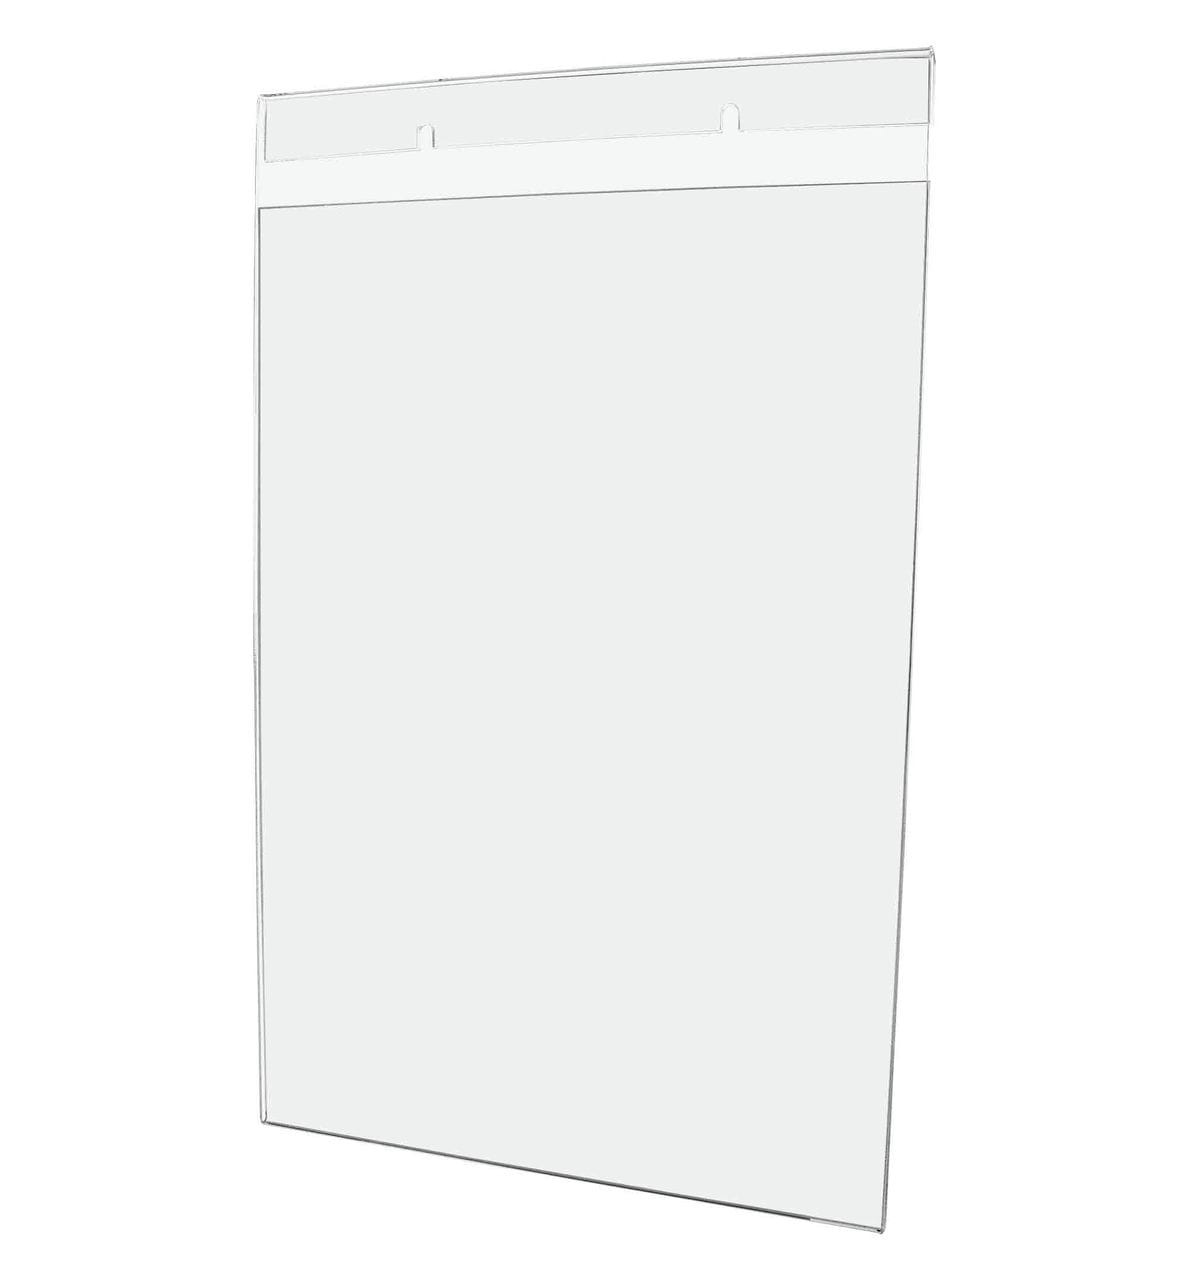 Sign Display Sleeve 11W x 17H Poster Holder with Notched Back